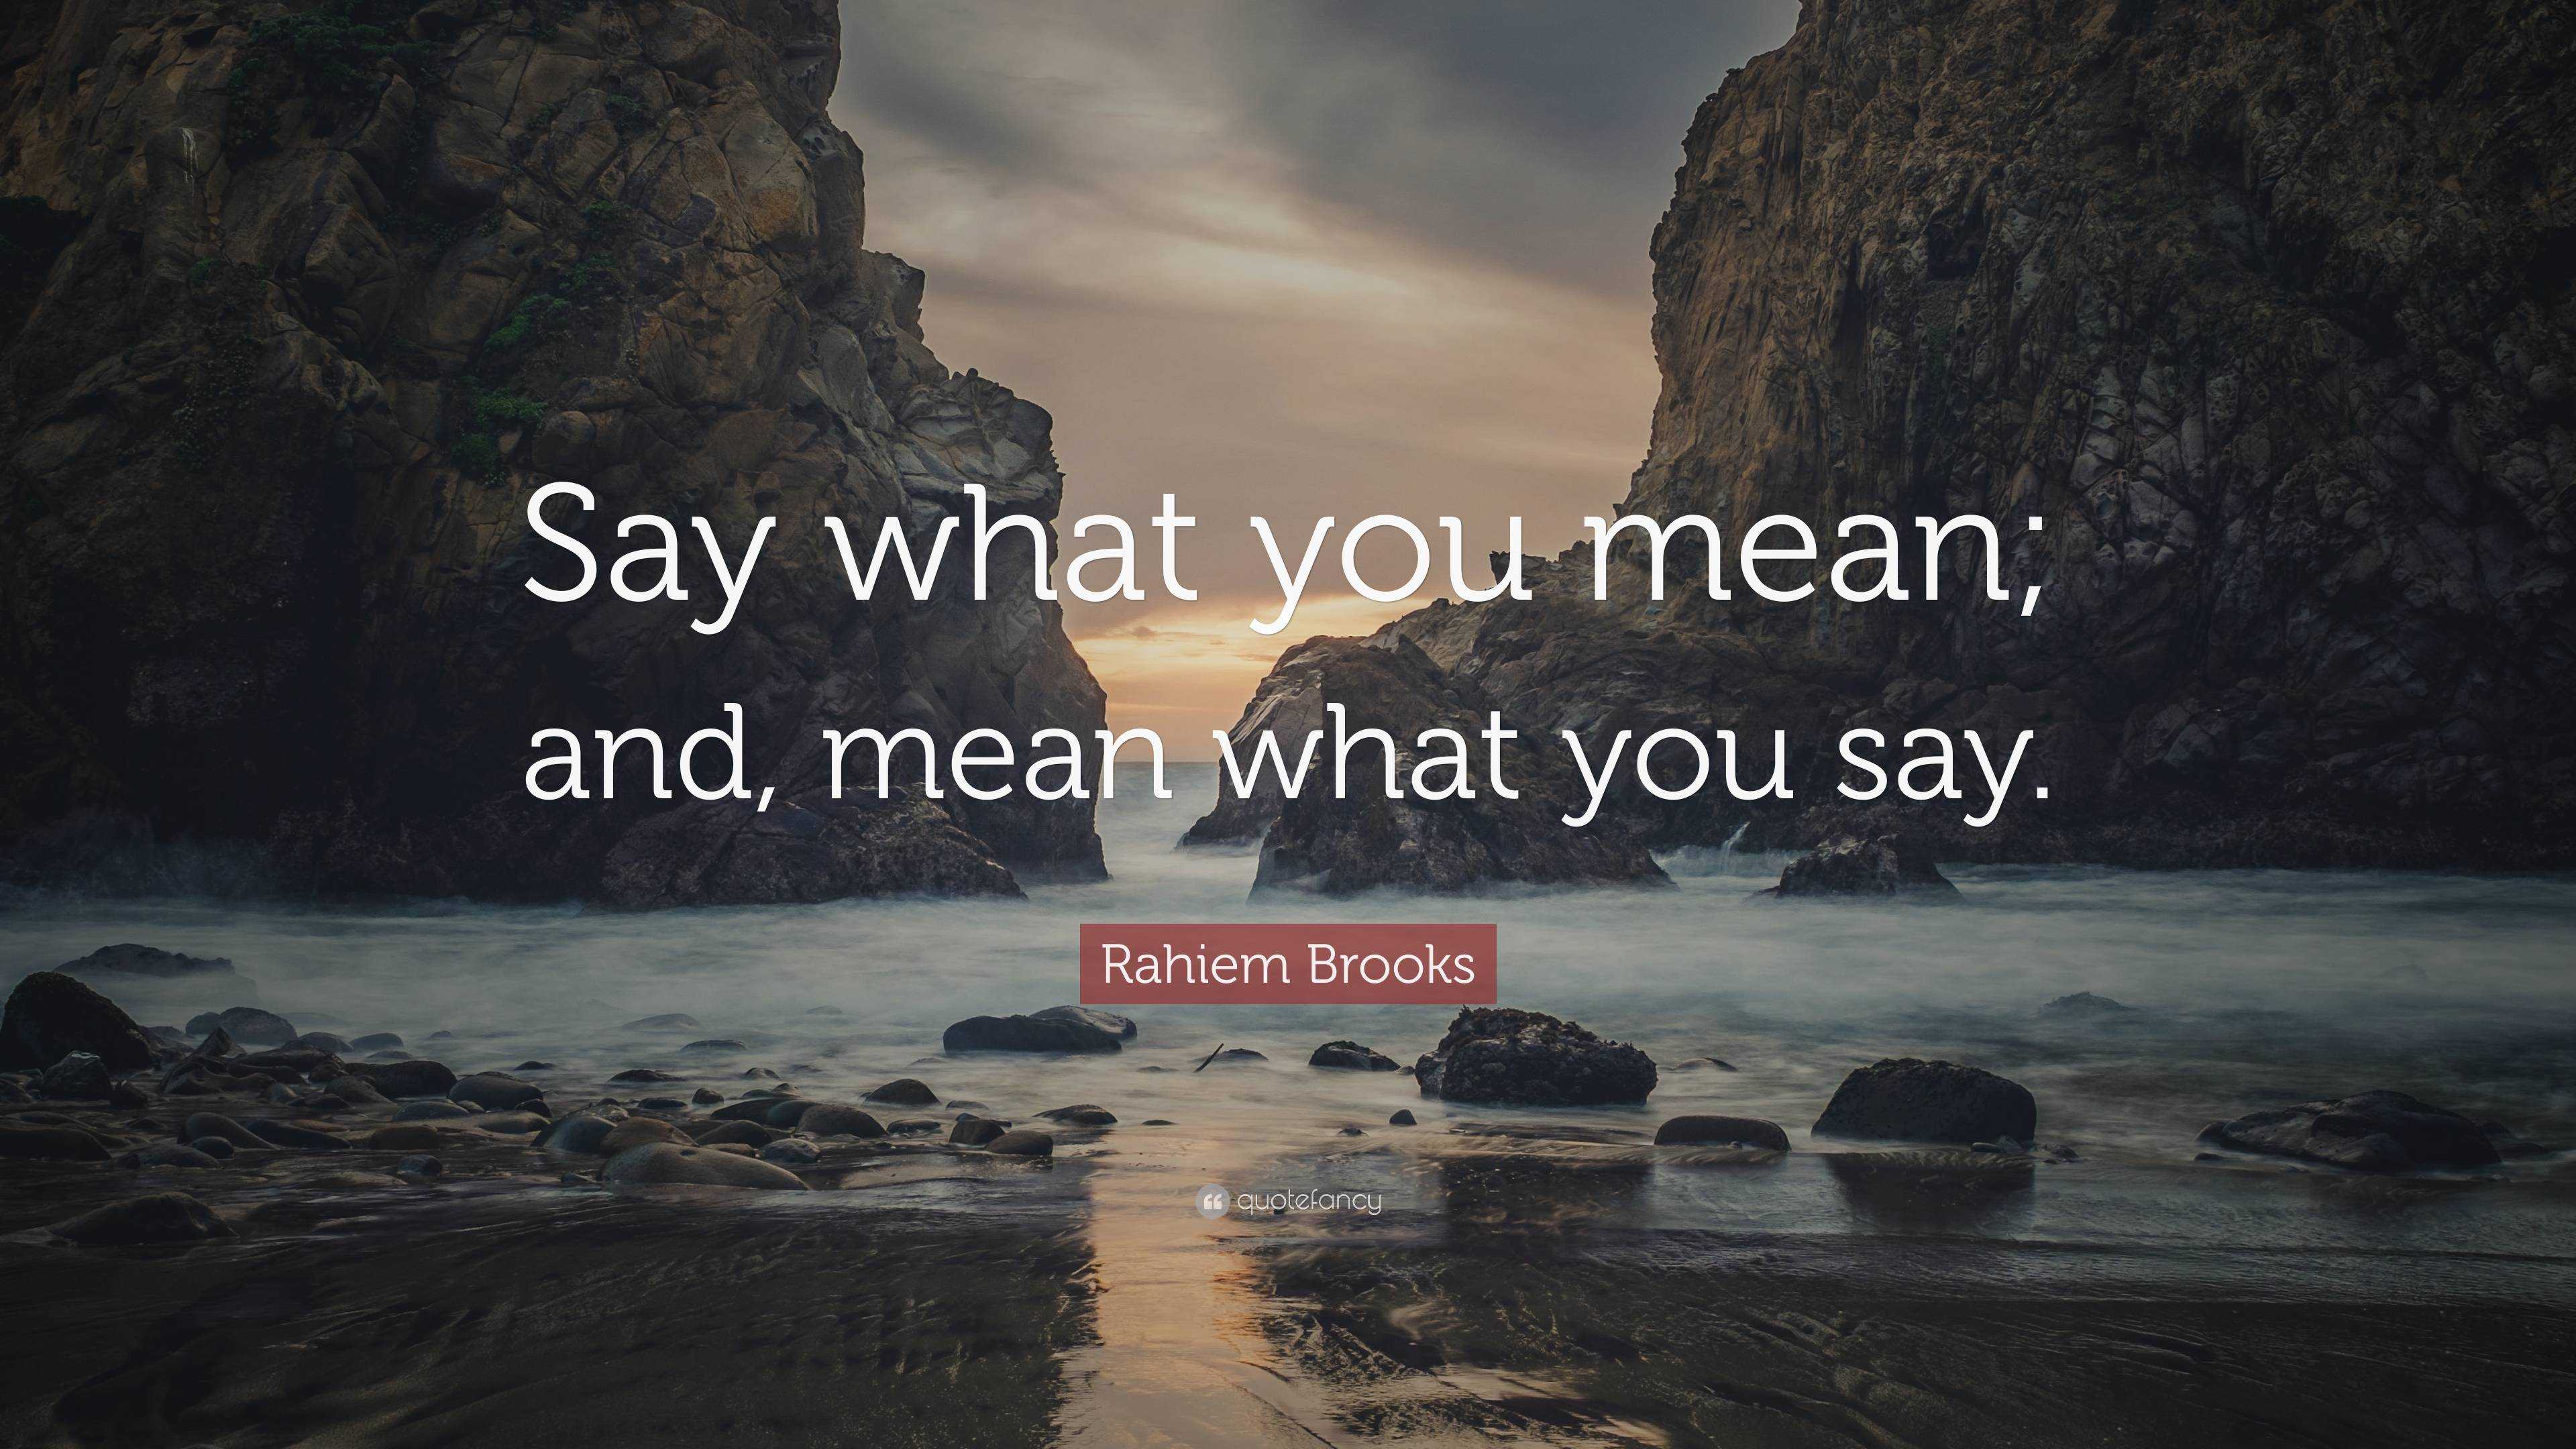 Rahiem Brooks Quote: “Say what you mean; and, mean what you say.”